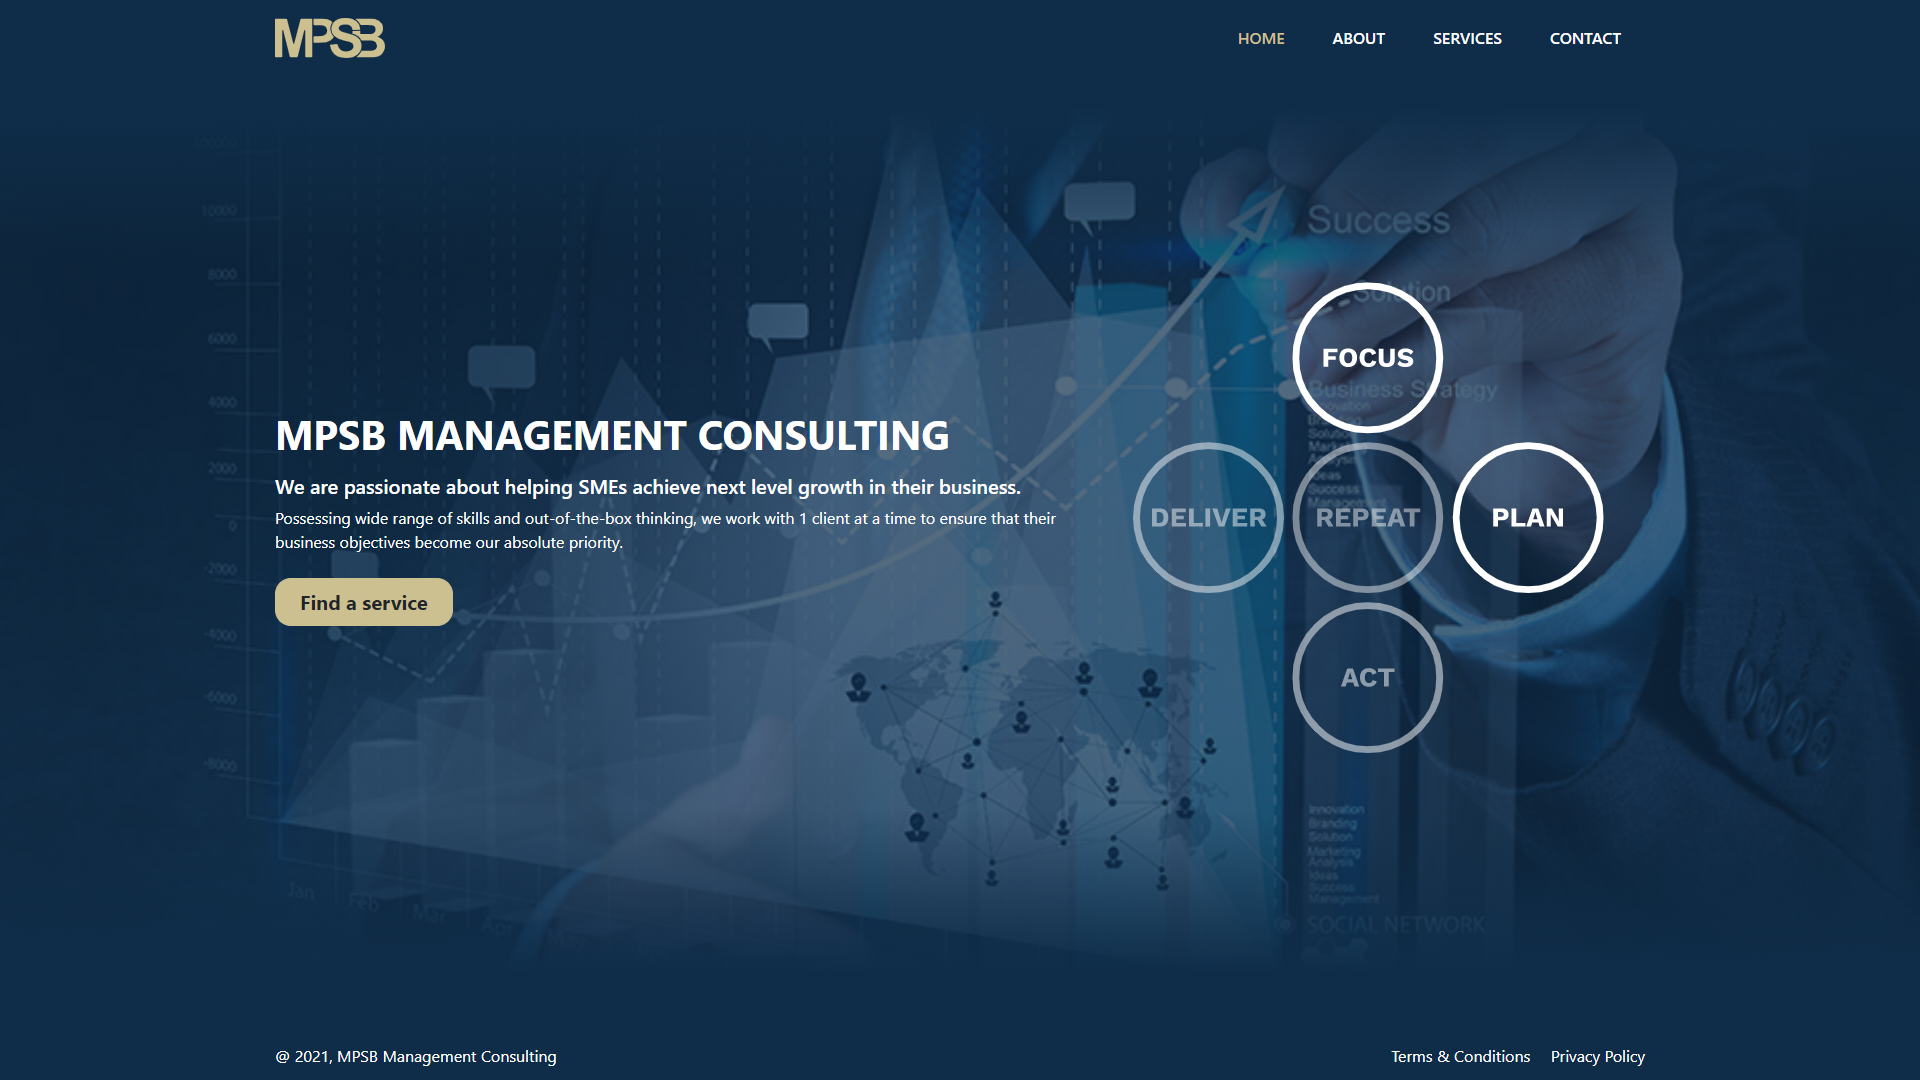 Image 1 of MPSB Management Consulting